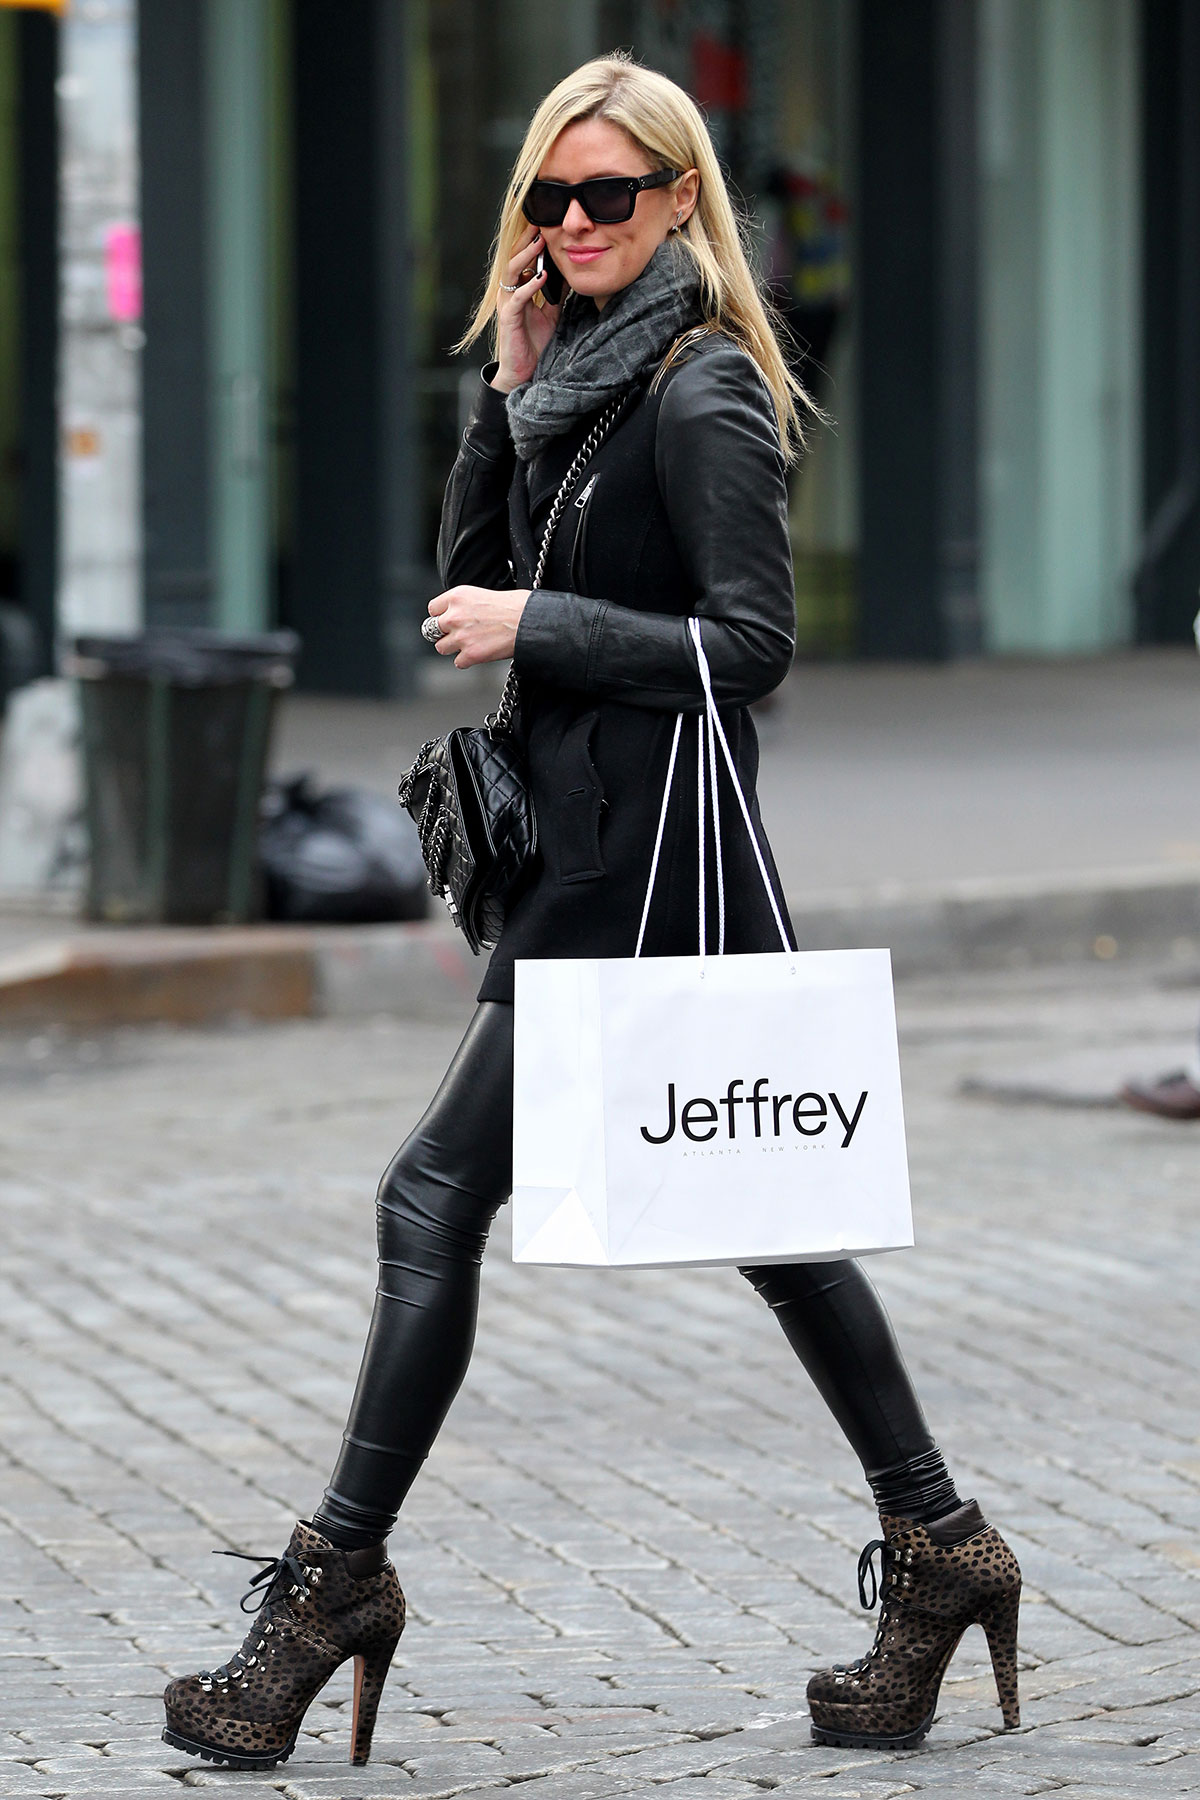 Paris and Nicky Hilton Shopping around the Meat Packing District (part2)